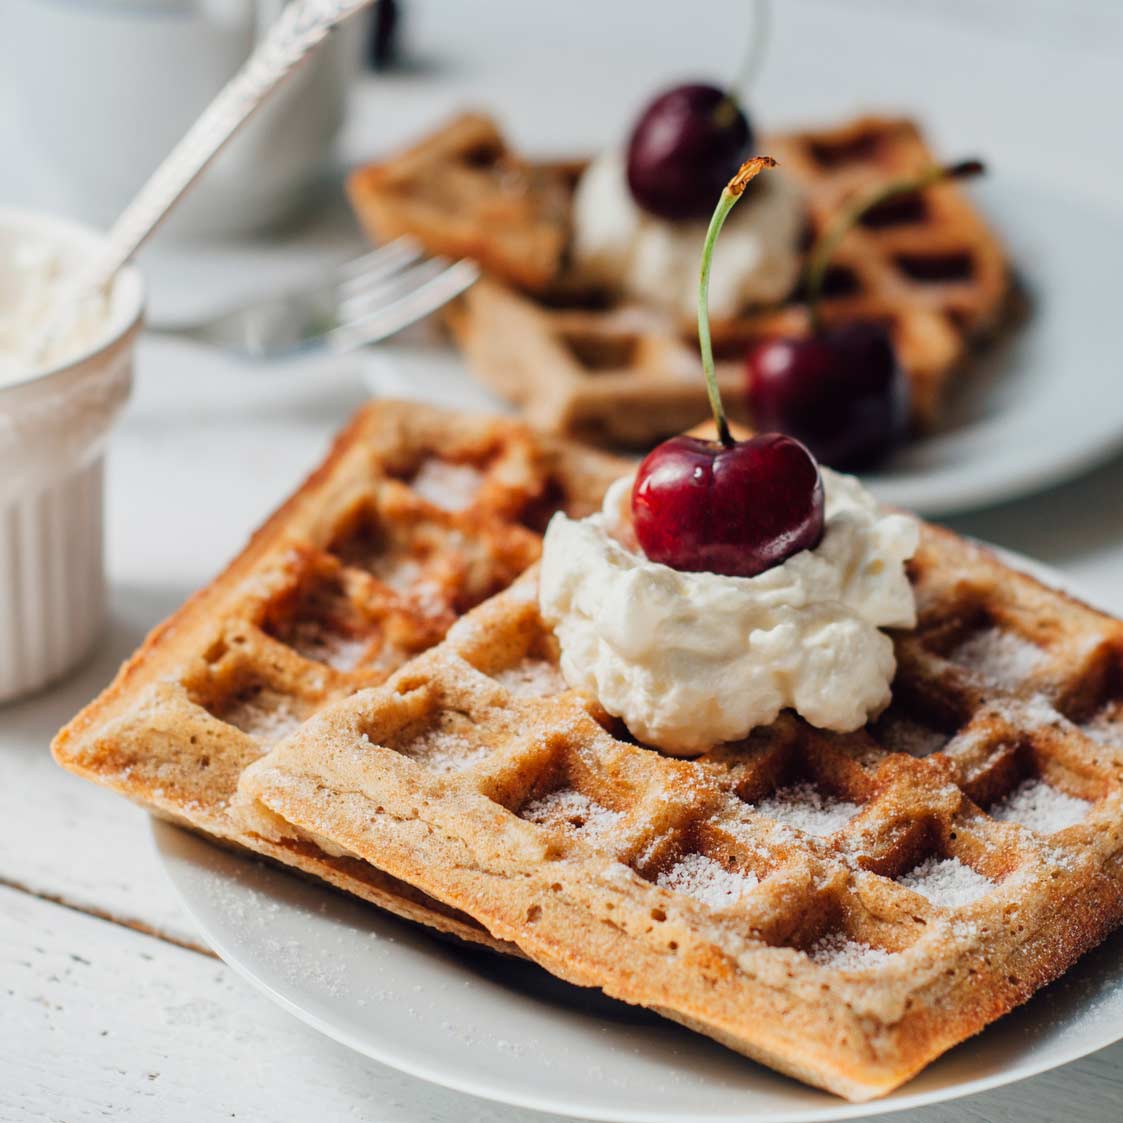 Whole Grain Waffles with Dipping Sauces